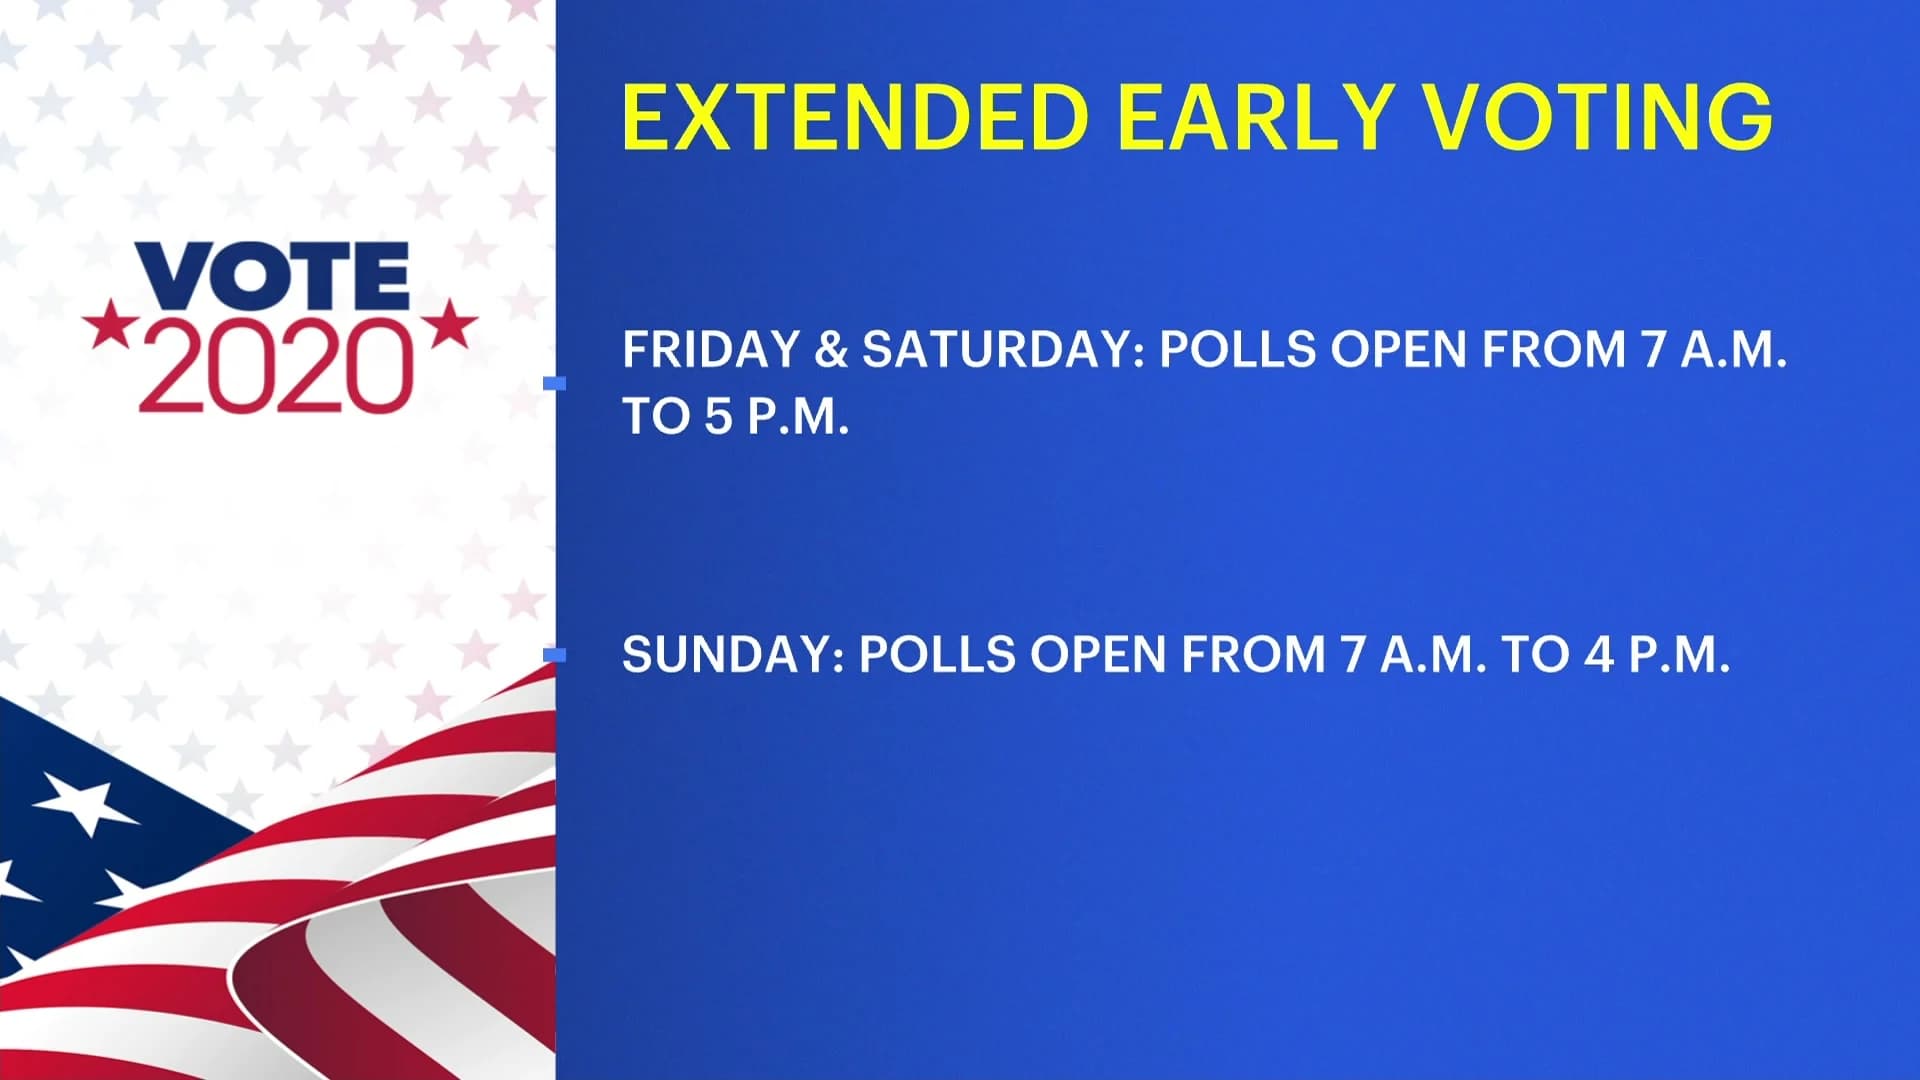 Board of Elections votes to extend early voting hours this weekend 